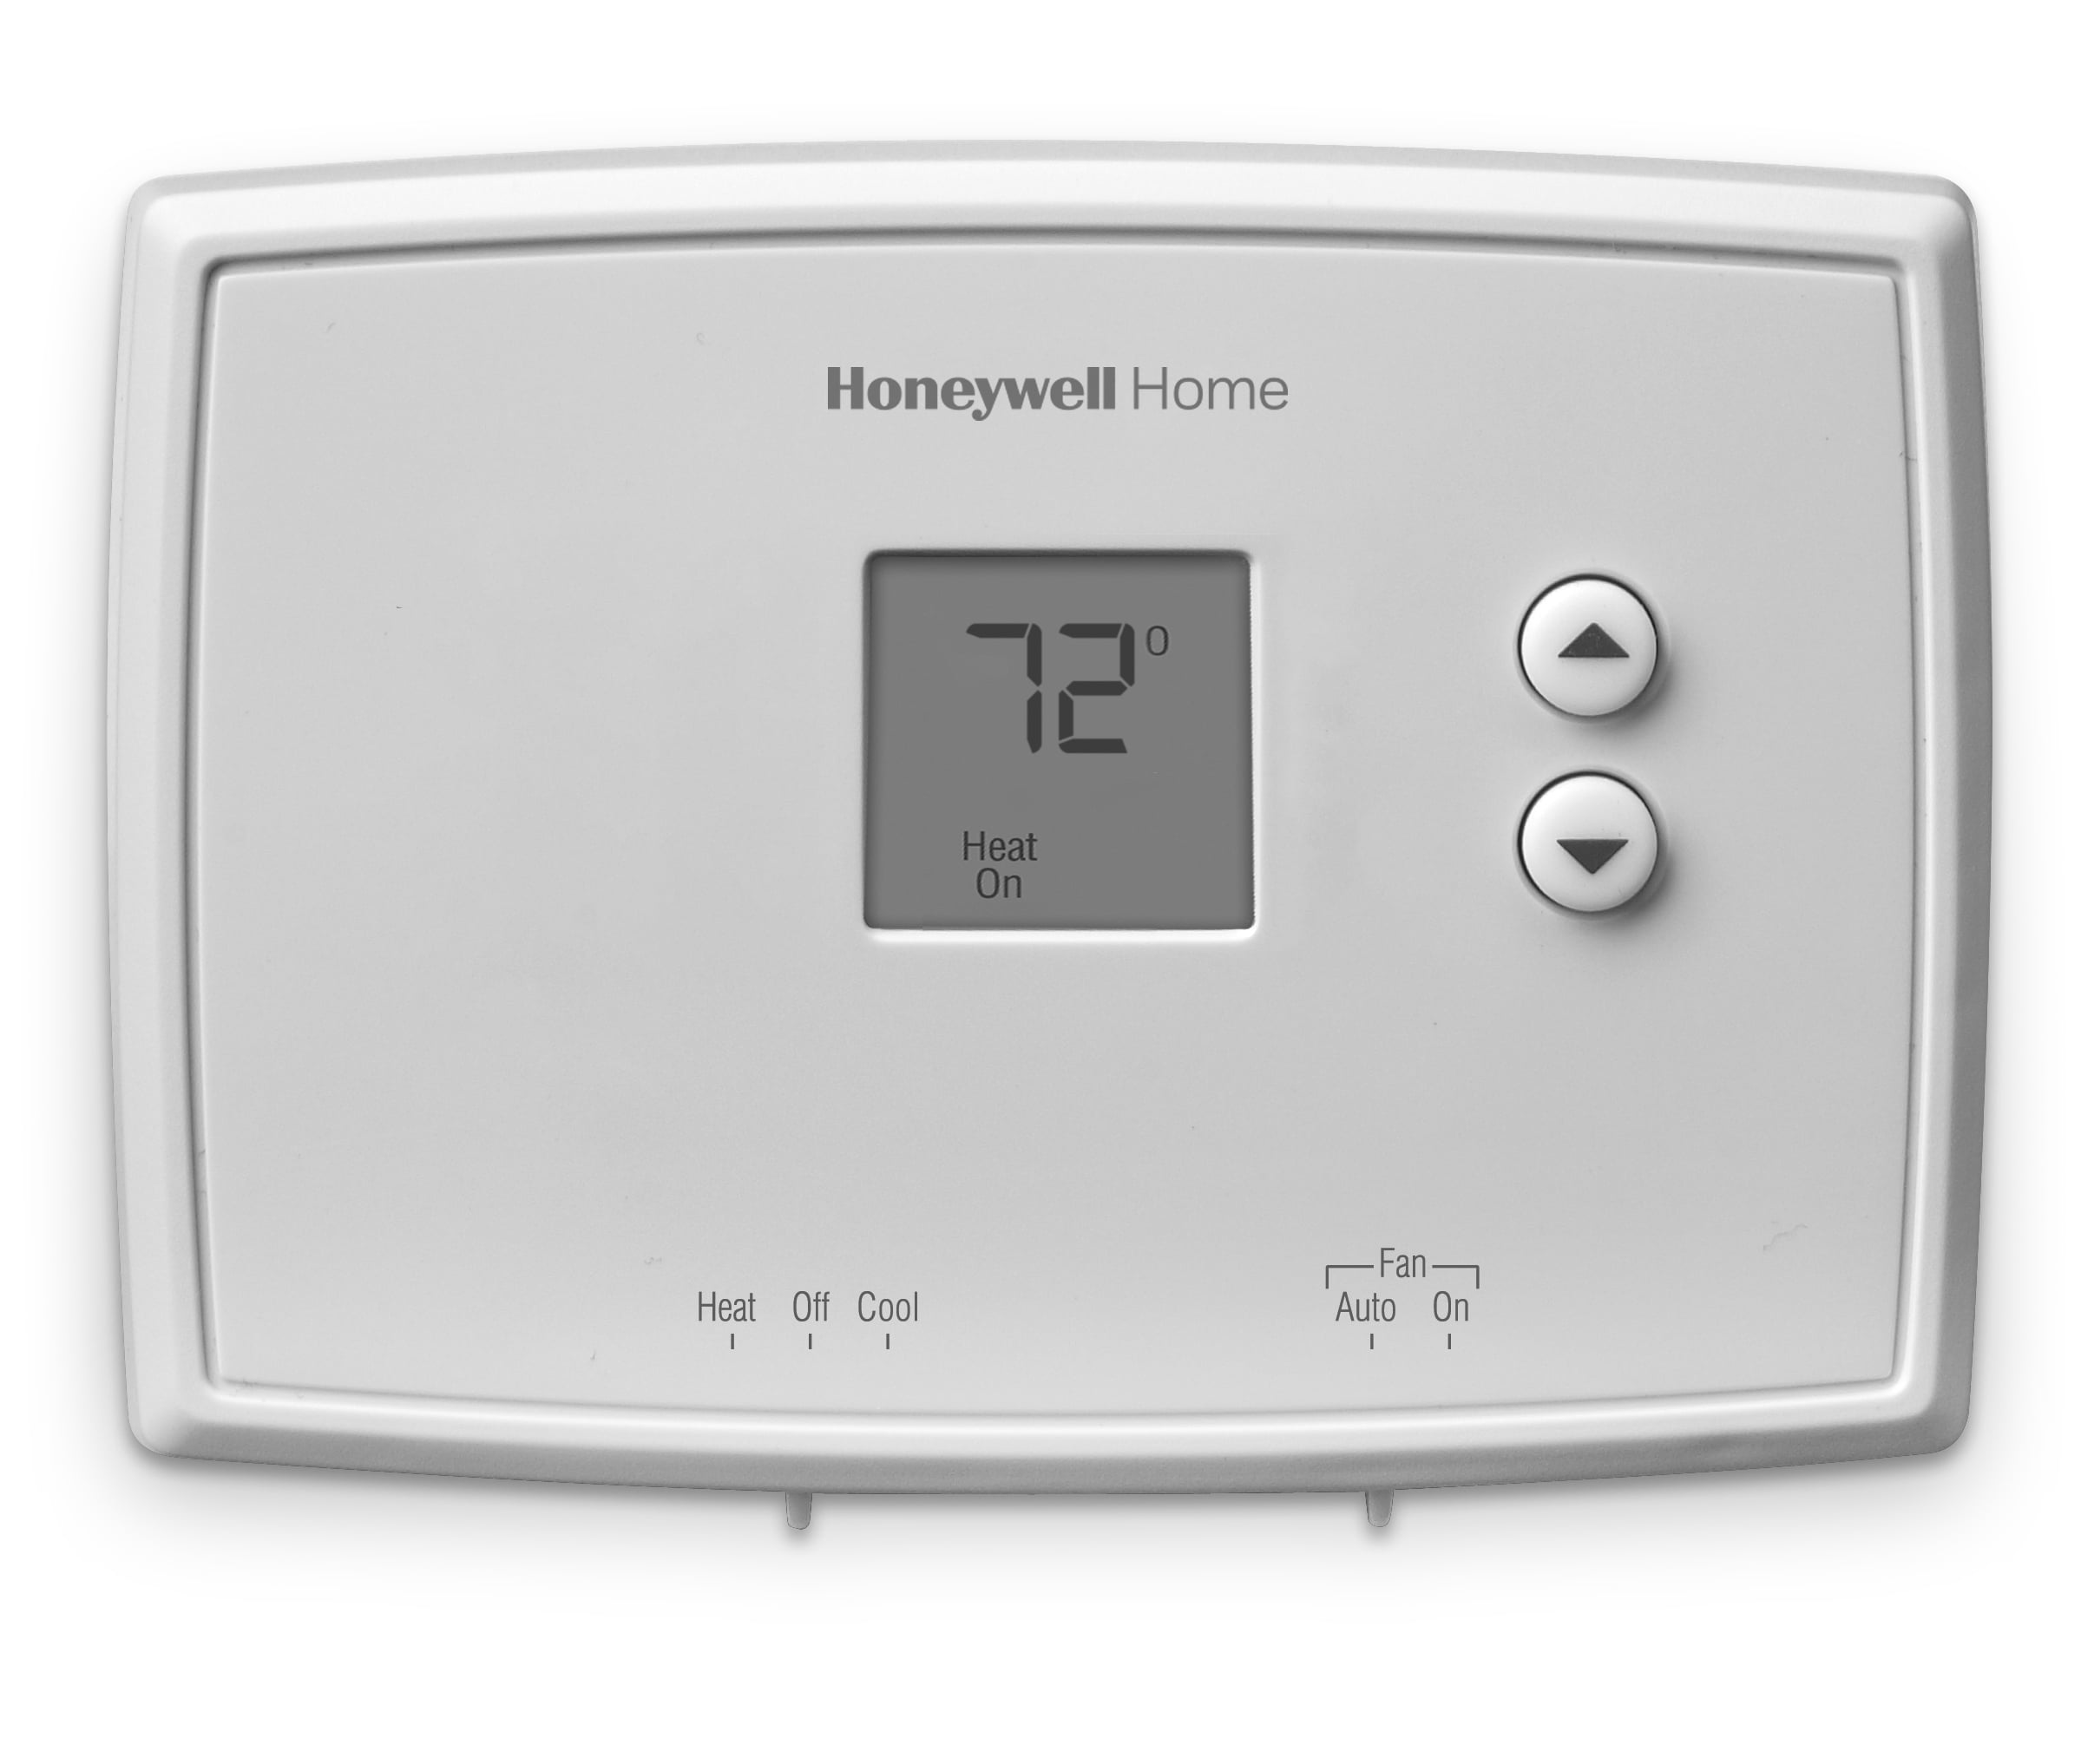 Honeywell Home RTH6450D1009 5-1-1-Day Programmable Thermostat, White, 1-Pack